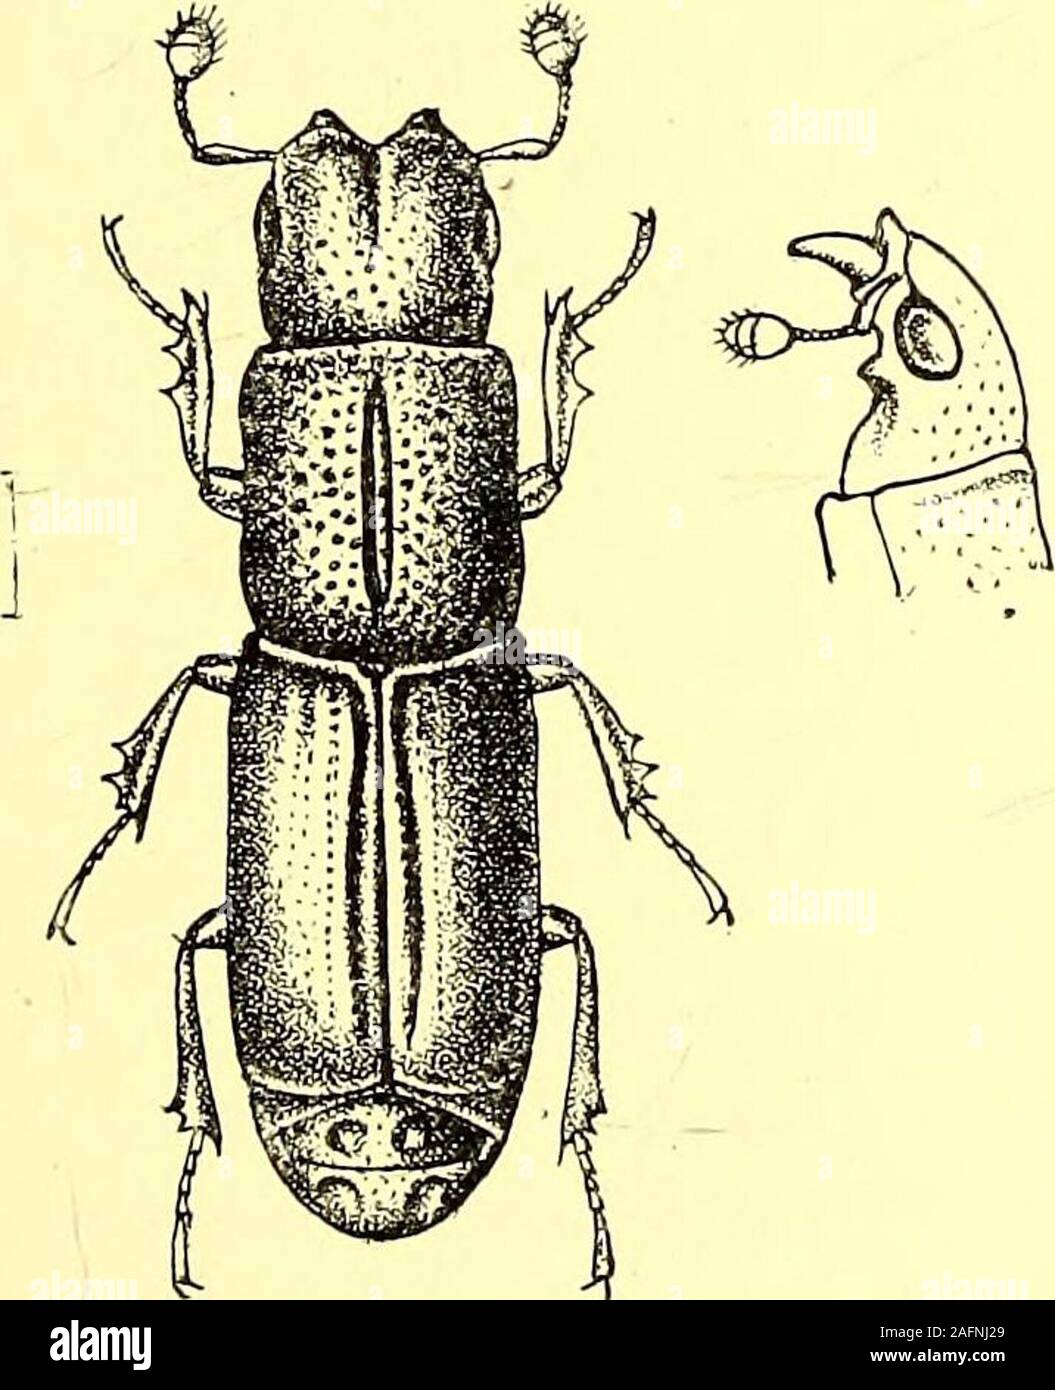 . Coleoptera : general introduction and Cicindelidae and Paussidae. ylindrical; head, large, nearly as broad, andsometimes as long, as prothorax; clypeus as a ride with horn-likeprojections; mandibles large and strong, perpendicularly reflex ed ; antennas geniculate, with a roundcompact club, apparently three-jointed, but with the basal joint(the eighth of the antenna?) verysmall; pronotum parallel-sided,oblong, as broad as elytra ; pro-sternum margined, rather nar-nowly dividing the transverse an-terior coccai, coxal cavities verynarrowly closed behind; meso-sternum very short, channelled;met Stock Photo